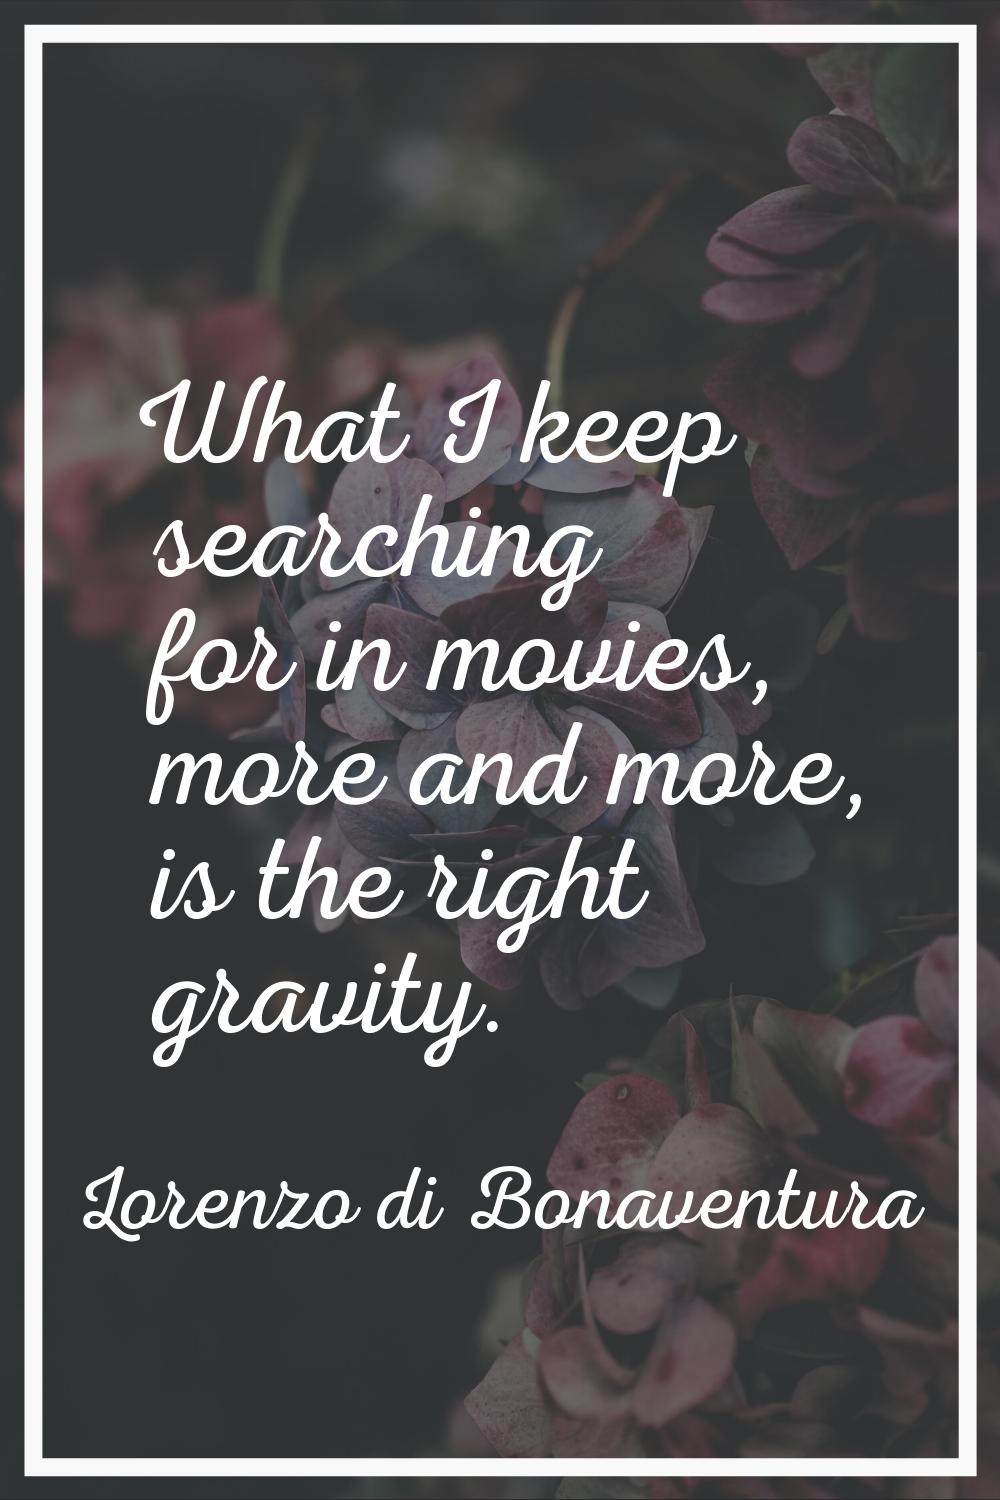 What I keep searching for in movies, more and more, is the right gravity.